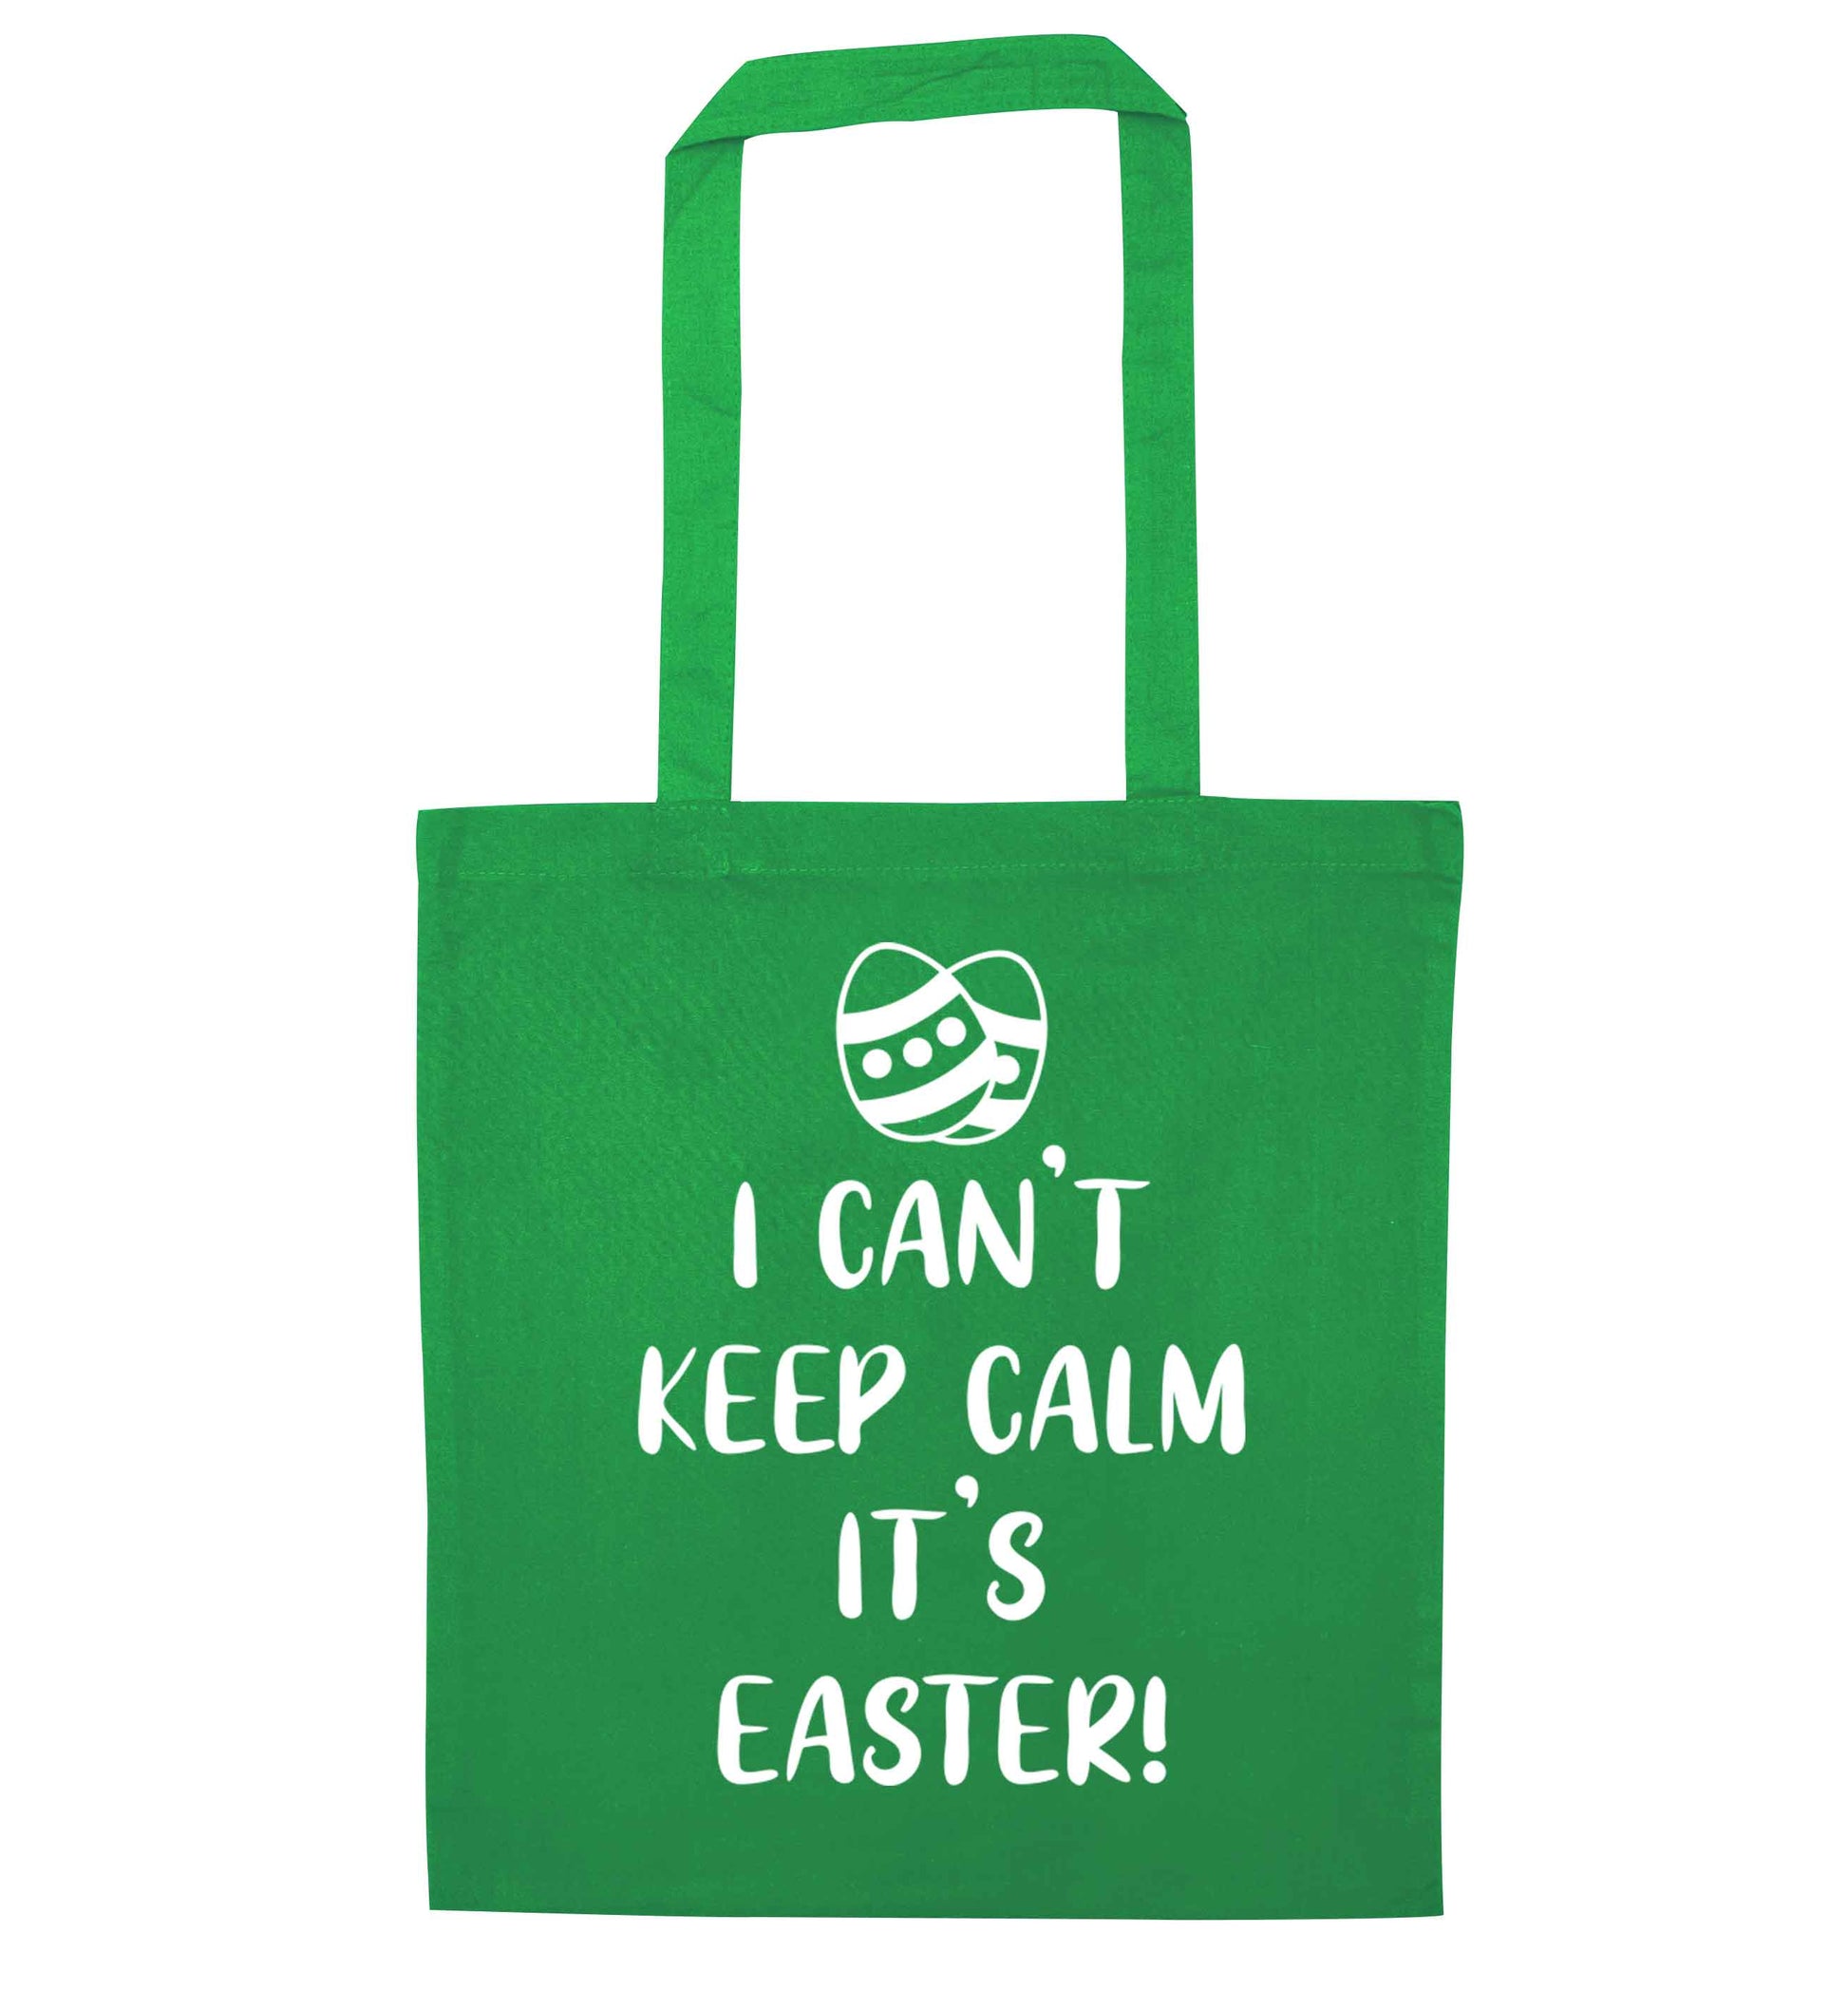 I can't keep calm it's Easter green tote bag